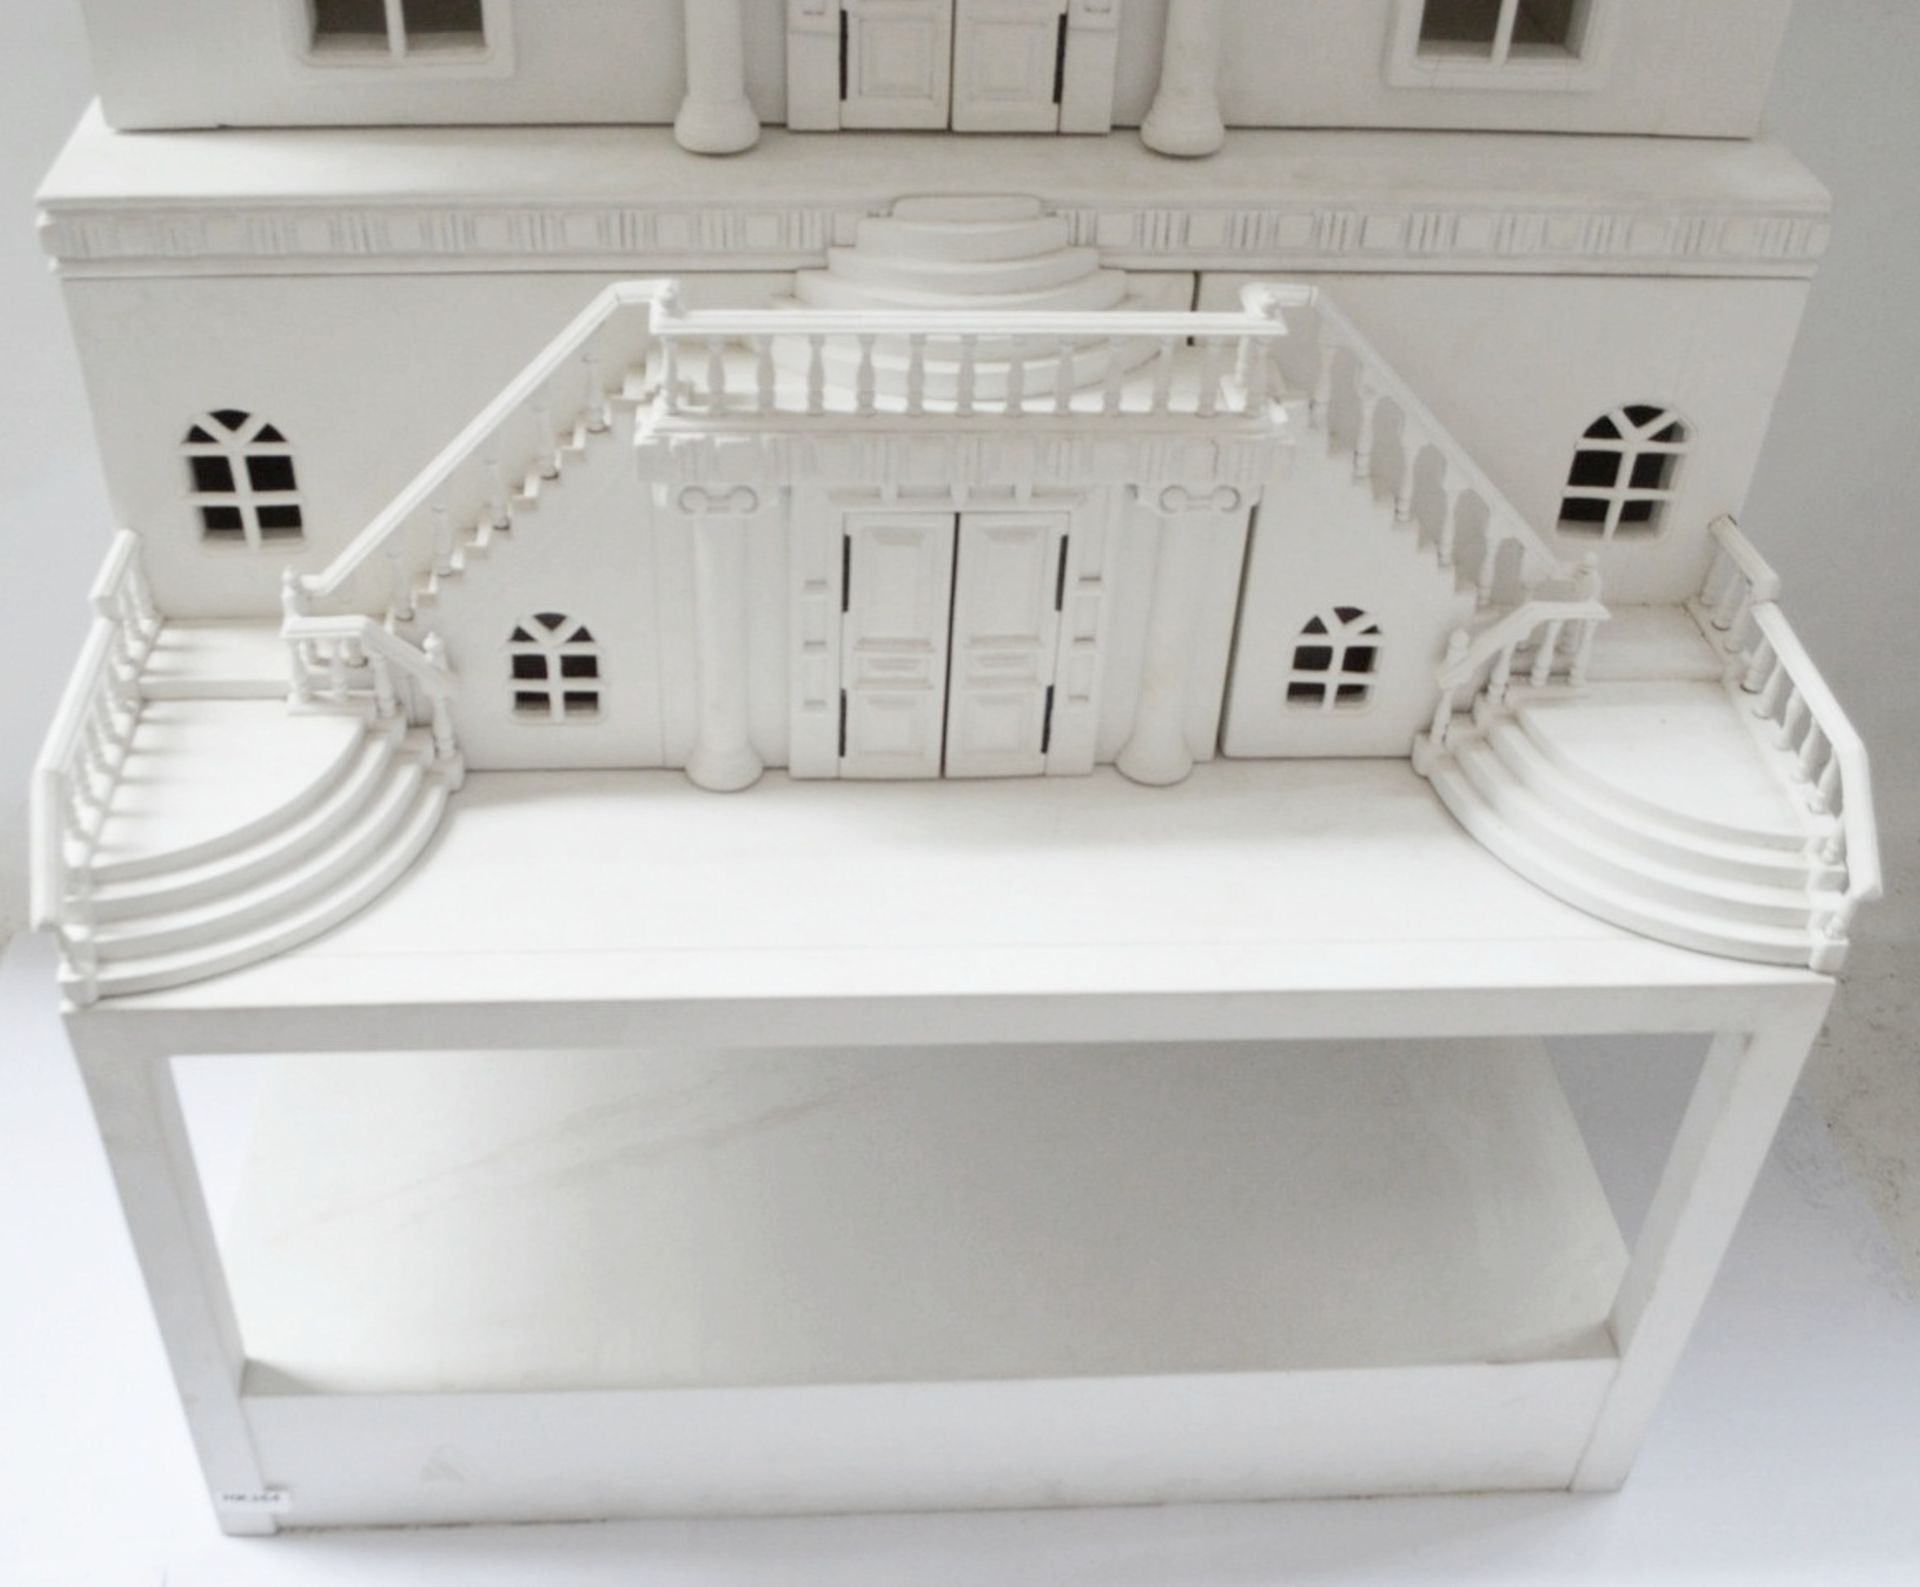 1 x Impressive Bespoke Hand Crafted Wooden Dolls House In White - Image 5 of 19